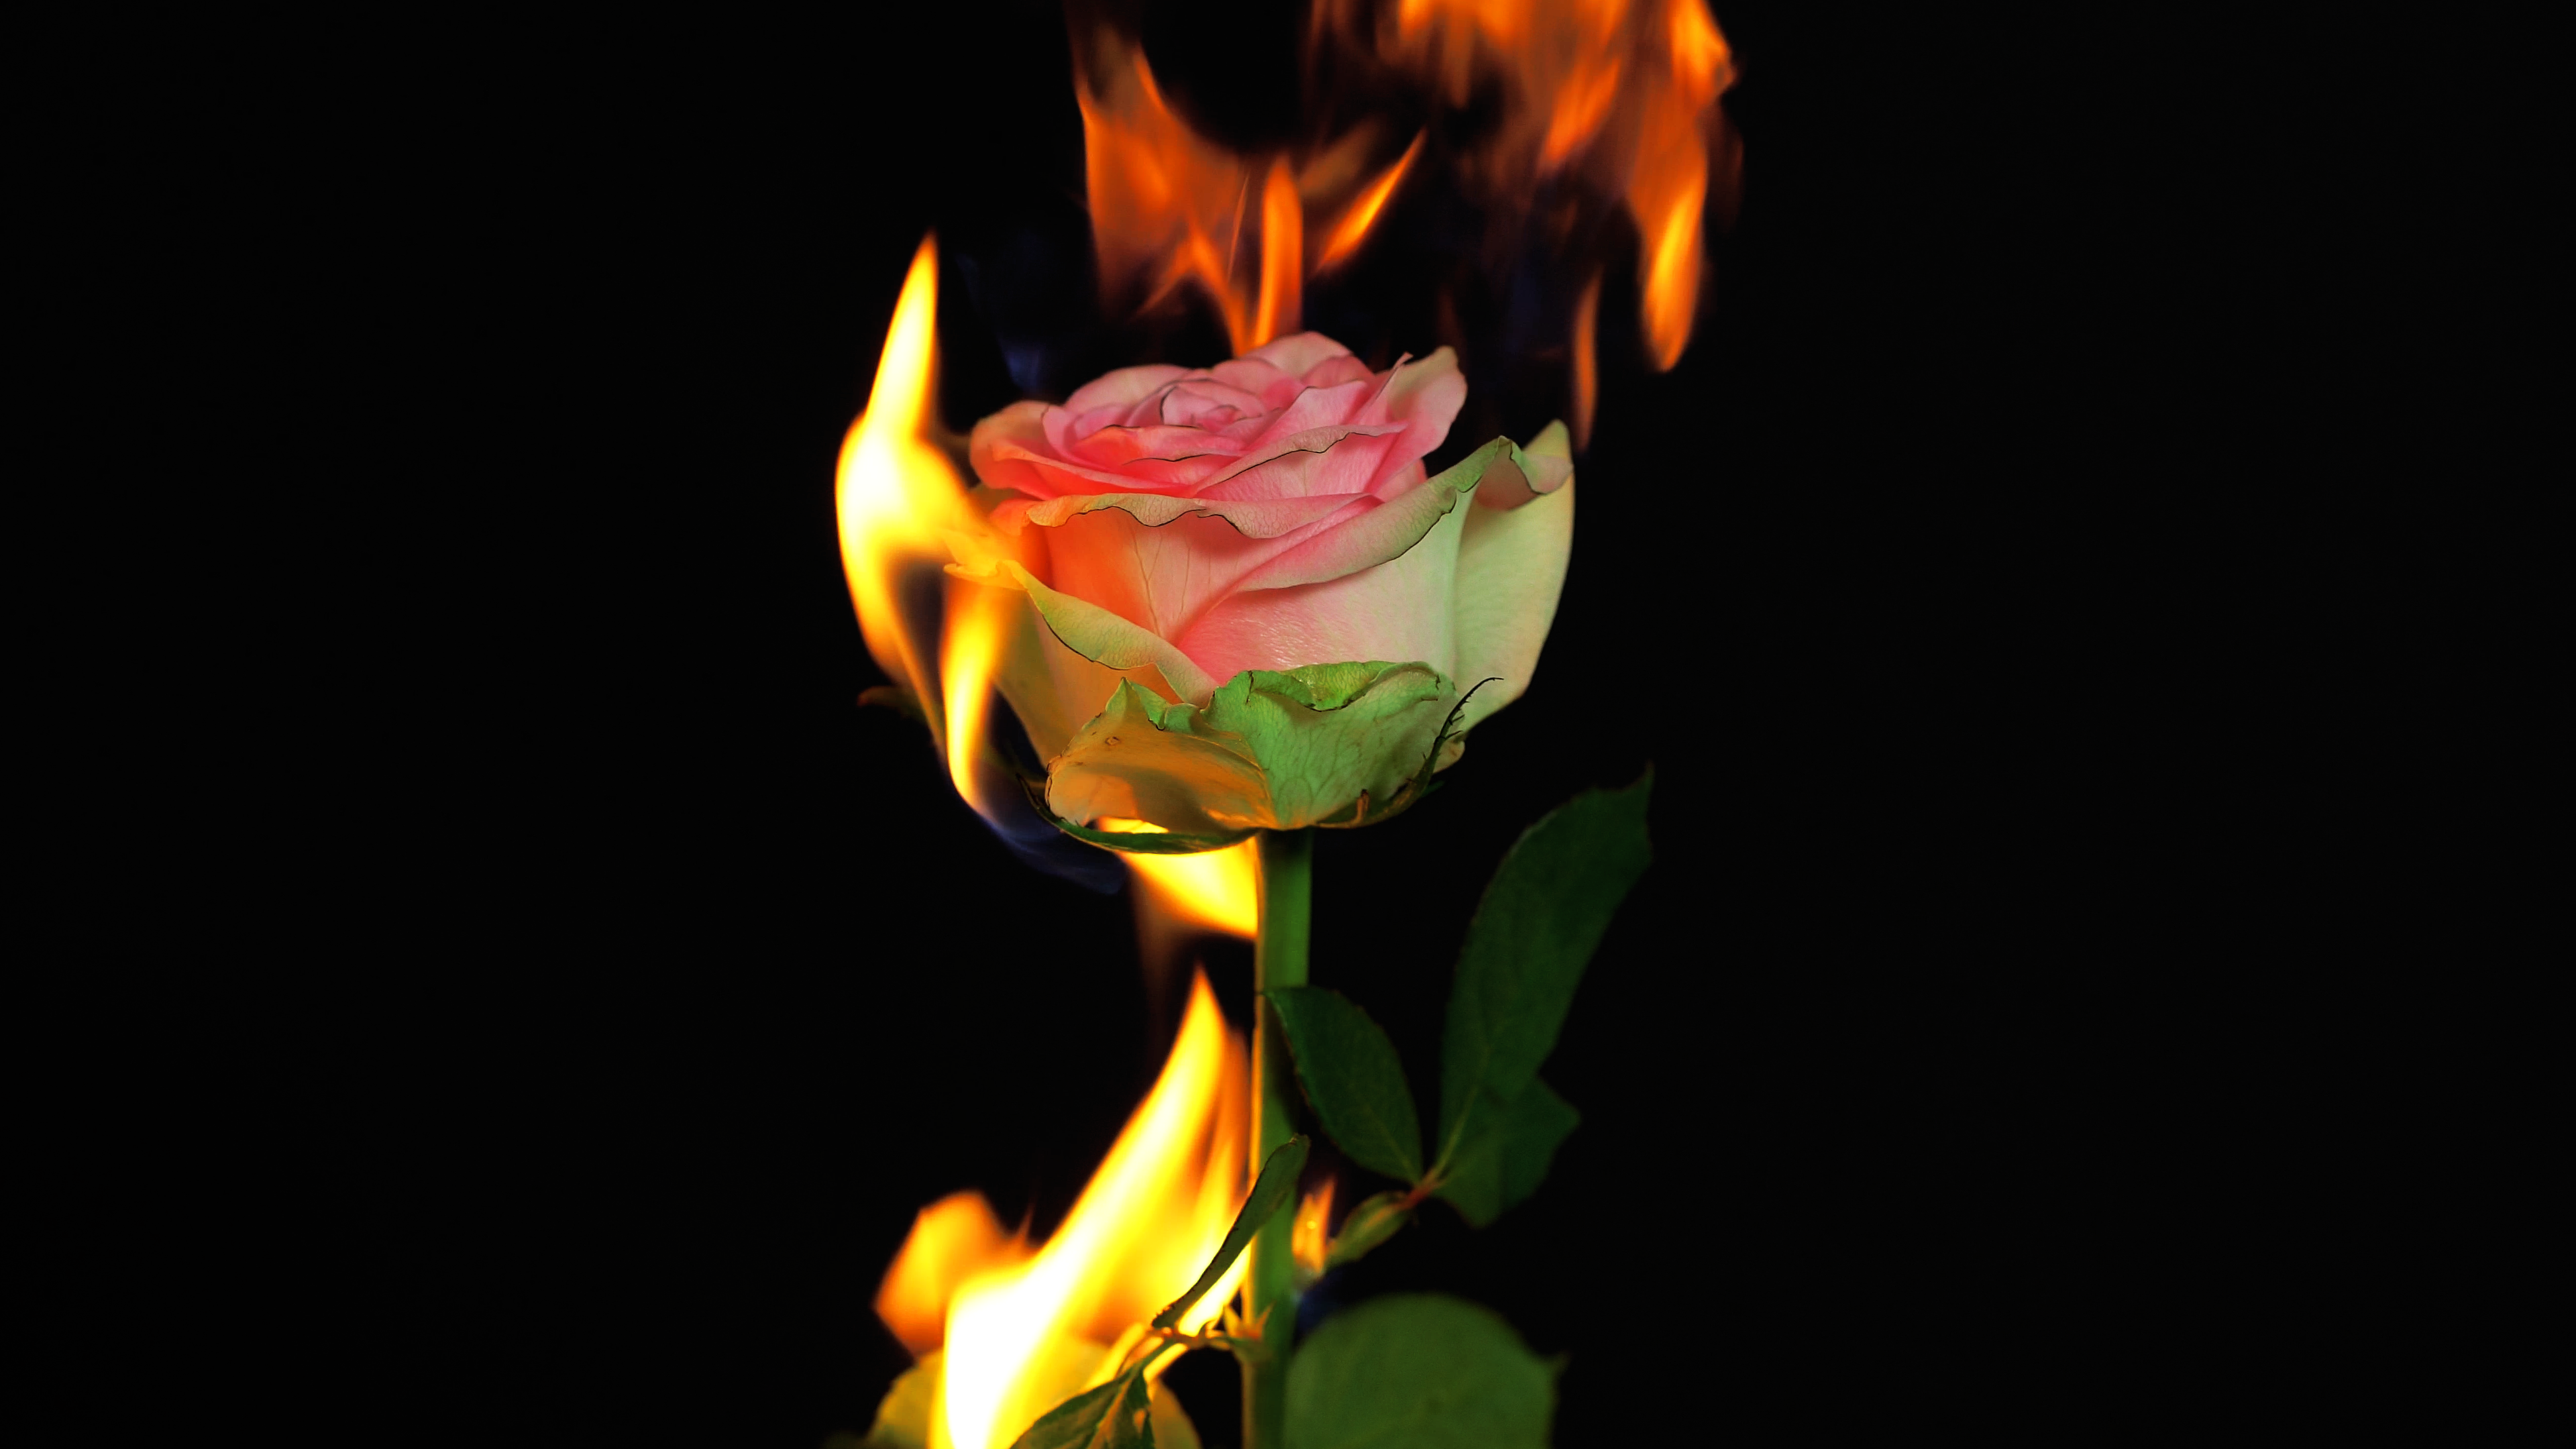 General 3840x2160 flowers fire rose black background